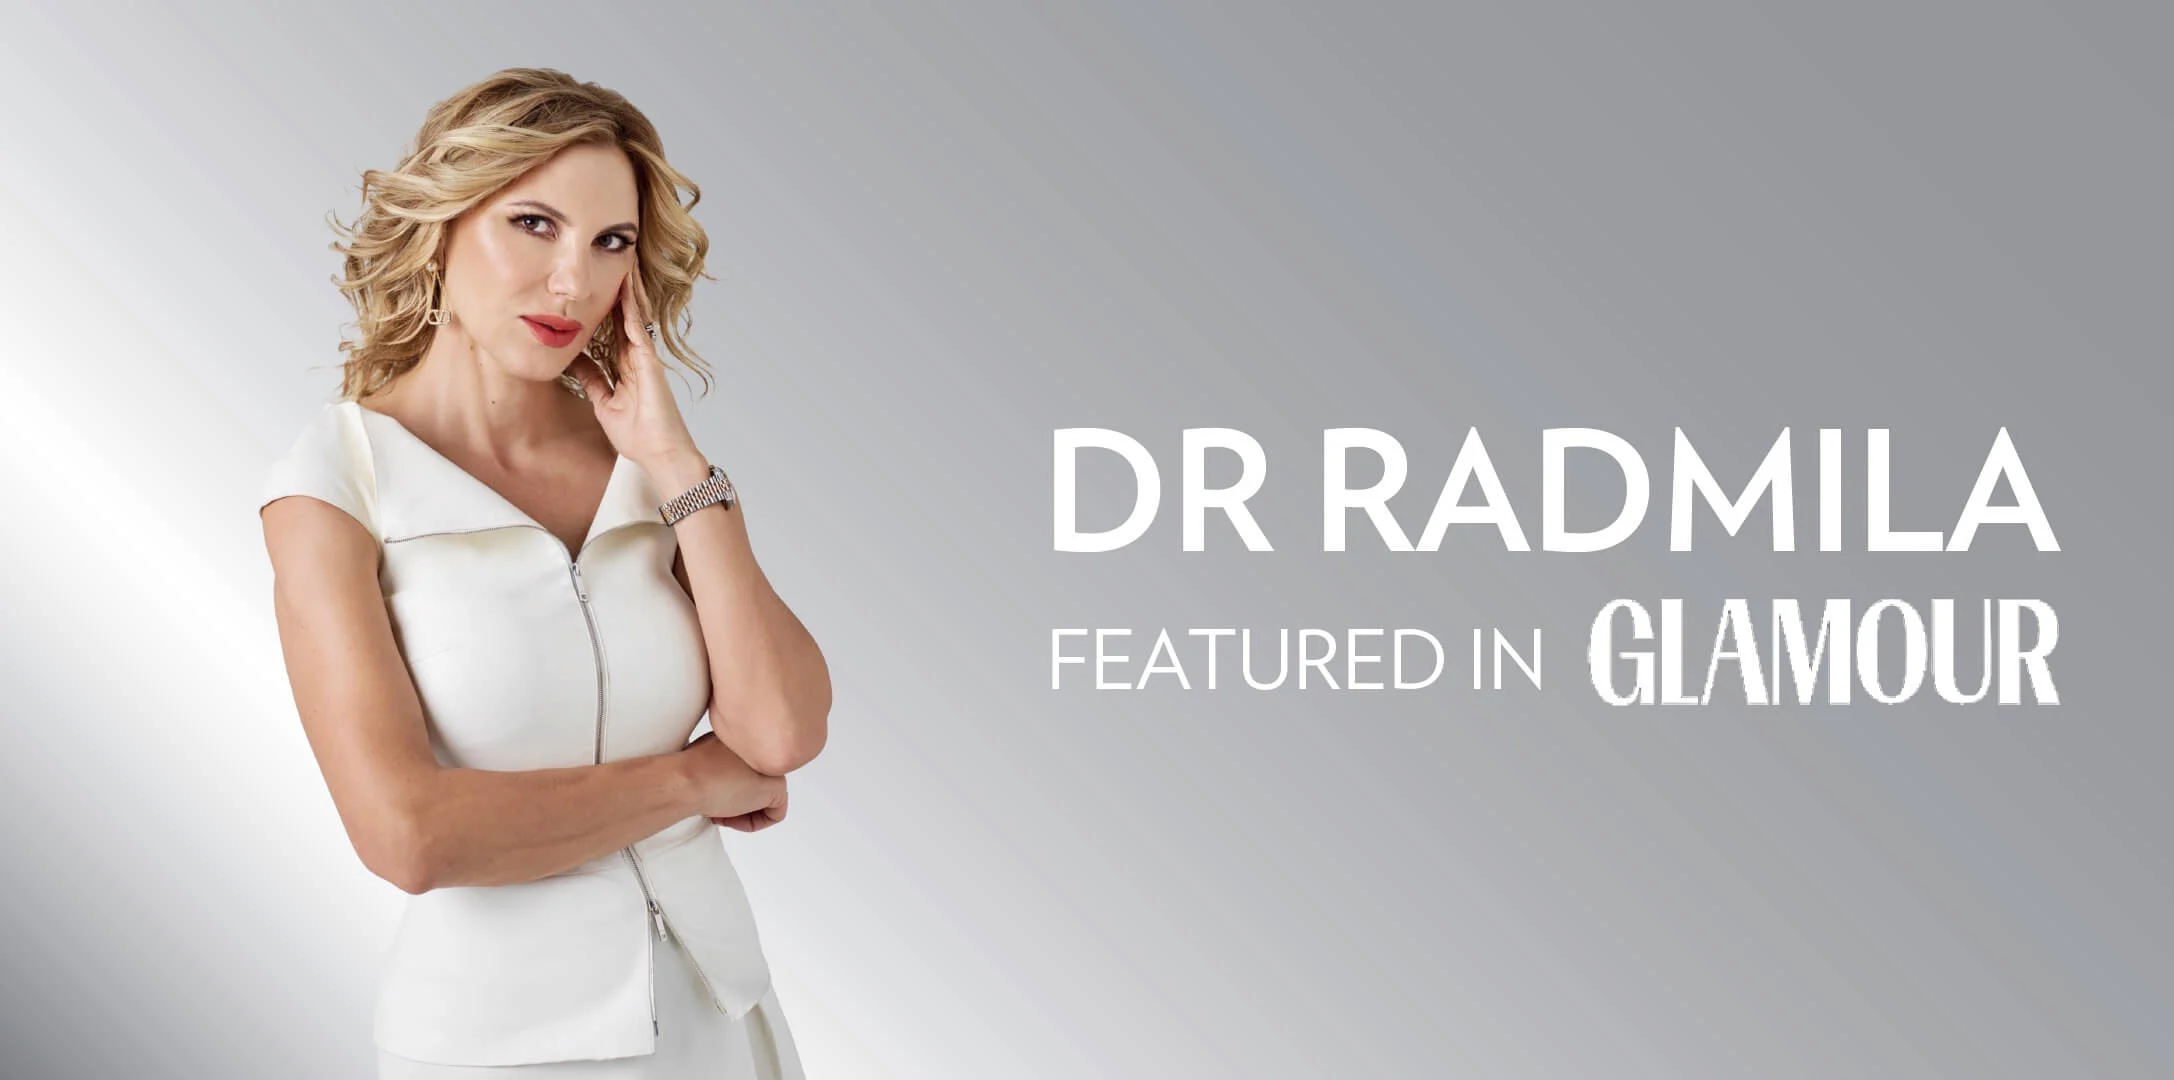 Dr. Radmila Lukian shares her wisdom about LED face masks - the leading dermatologist featured in Glamour magazine, talks about an amazing aesthetic treatment.